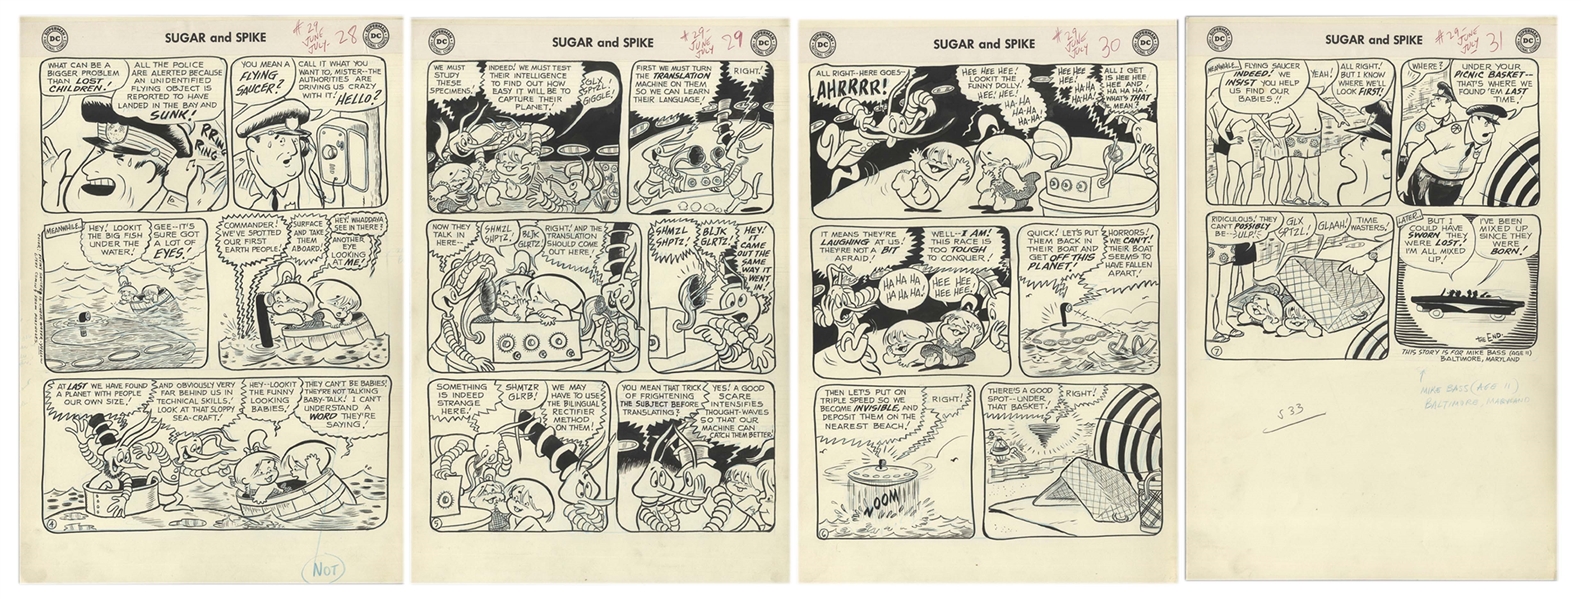 Sheldon Mayer Original Hand-Drawn ''Sugar and Spike'' Comic Book -- Complete Issue of 28 Pages From the June-July 1960 Issue #29 -- Flying Saucers & Sharks!